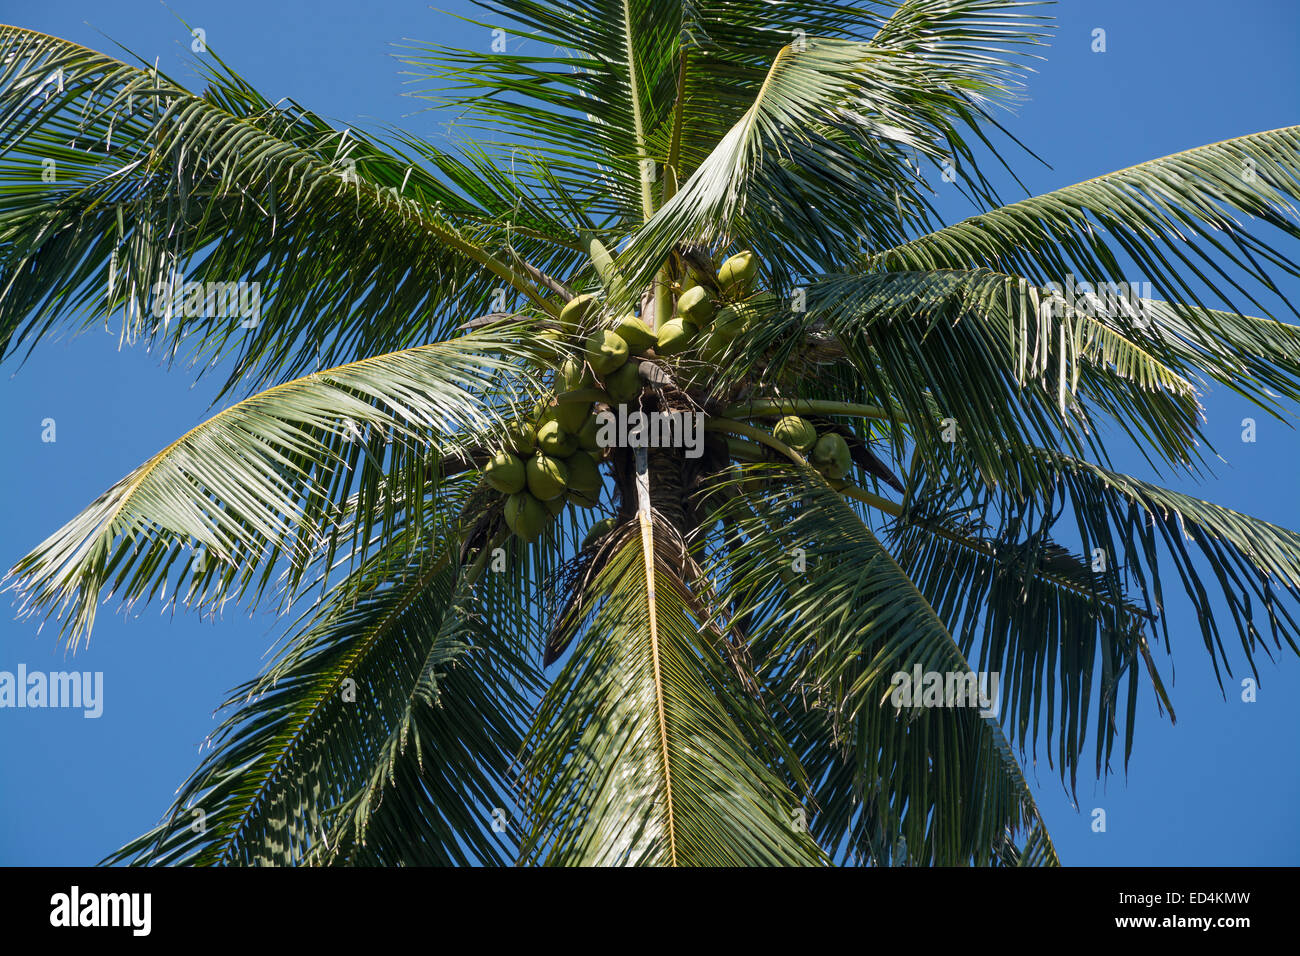 King Coconuts in tree growing in a garden in Southern Province, Sri Lanka, Asia. Stock Photo